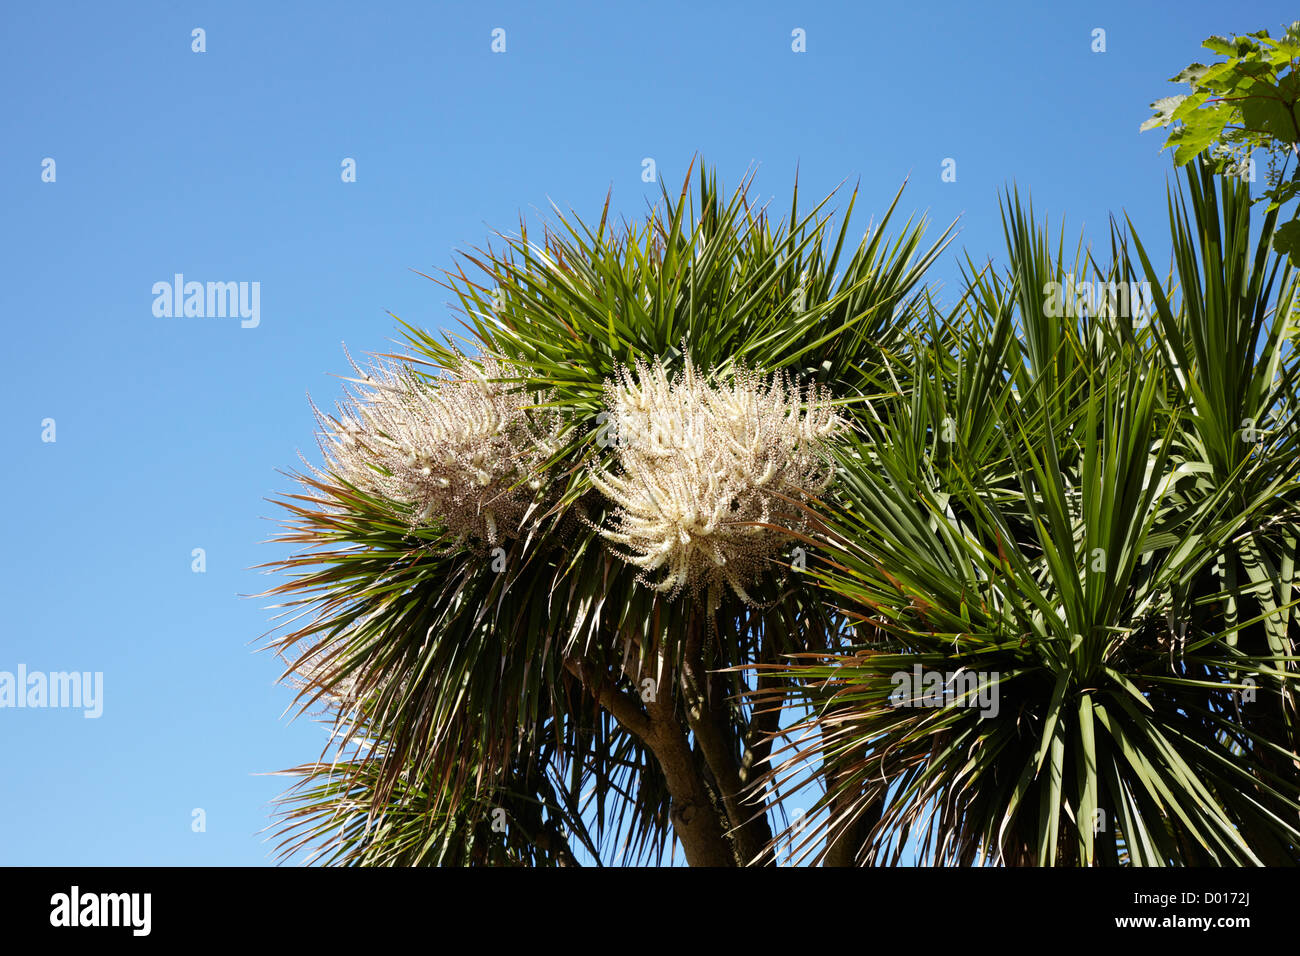 Cabbage palm in flower Stock Photo